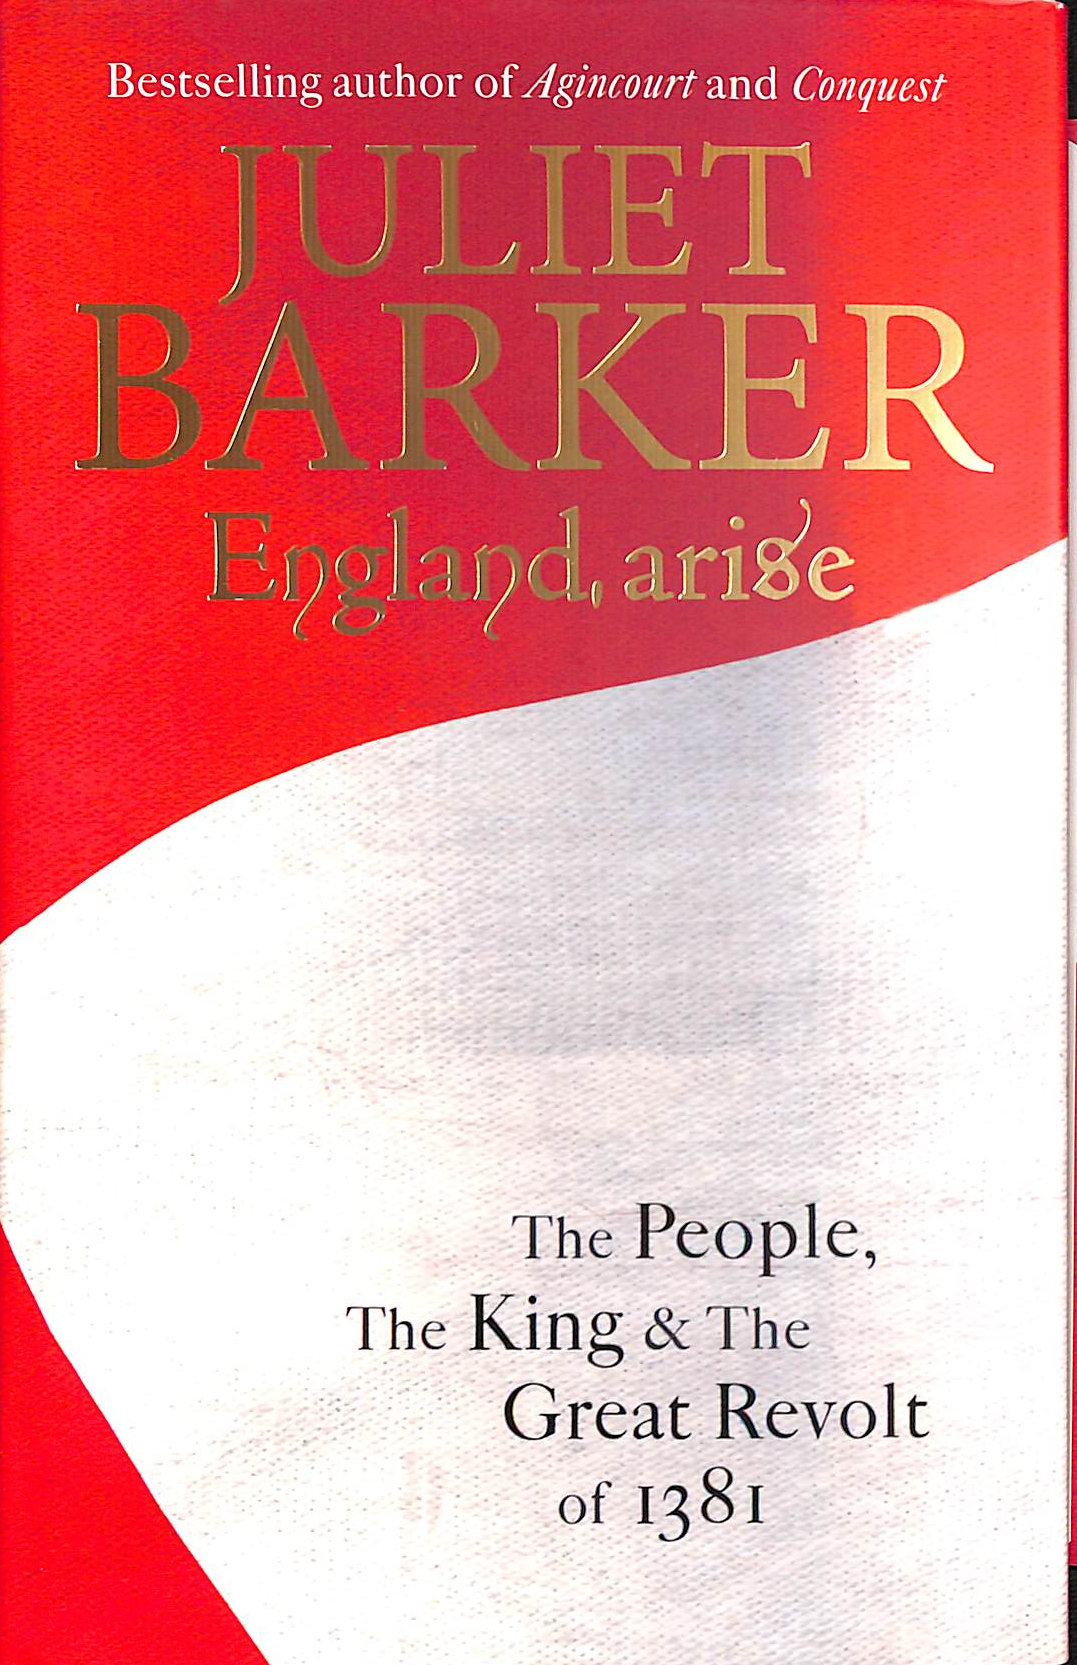 BARKER, JULIET - England, Arise: The People, the King and the Great Revolt of 1381